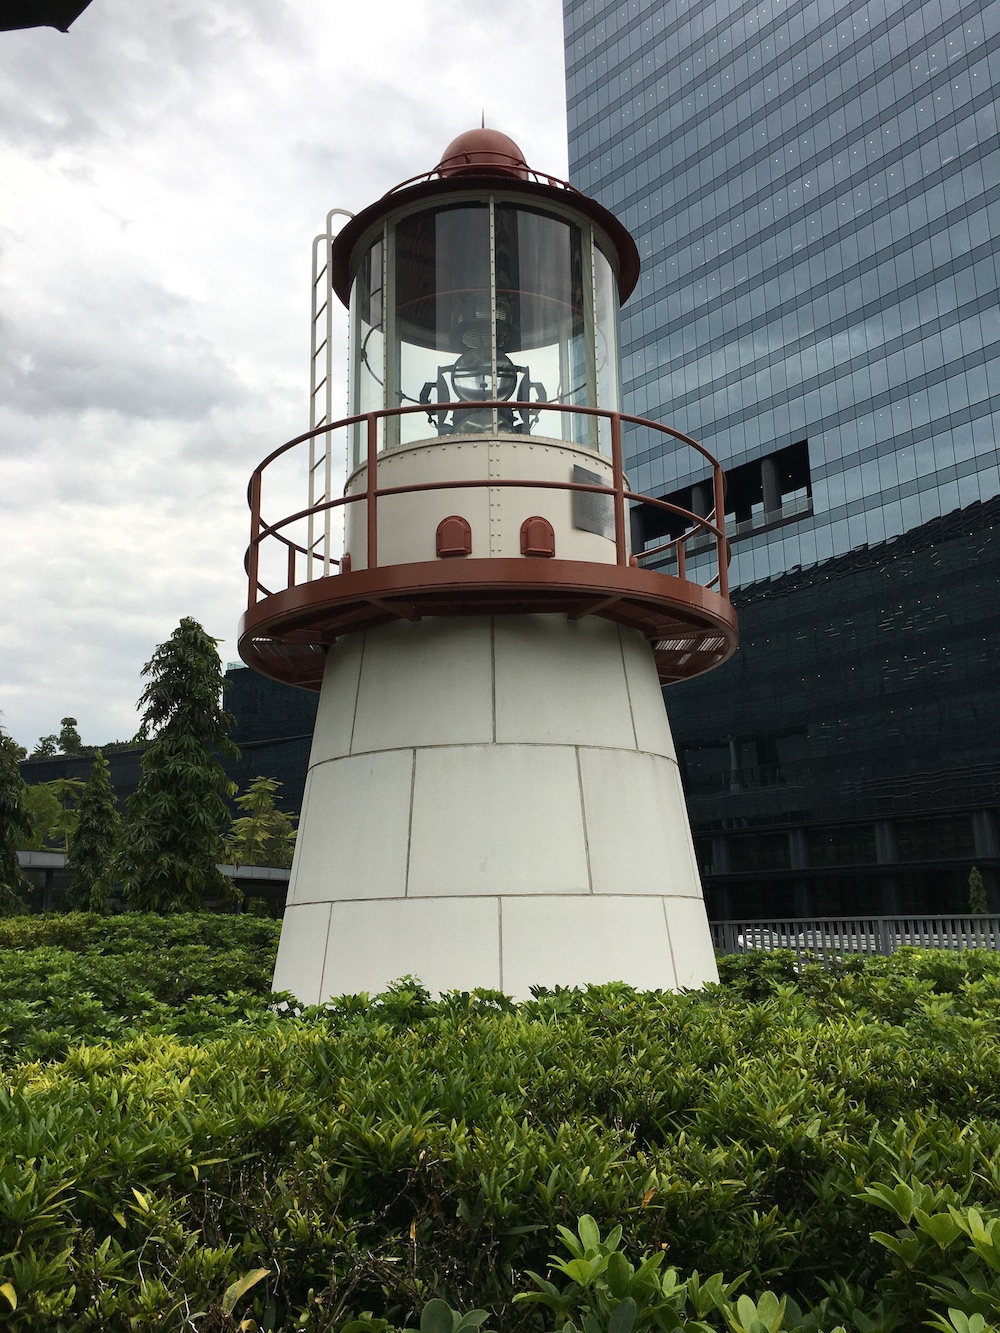 Built in 1958, the Fullerton Lighthouse was installed atop the former Fullerton Building (Fullerton Hotel) at the mouth of the Singapore River as a navigational aid to guide ships into Singapore’s harbour.